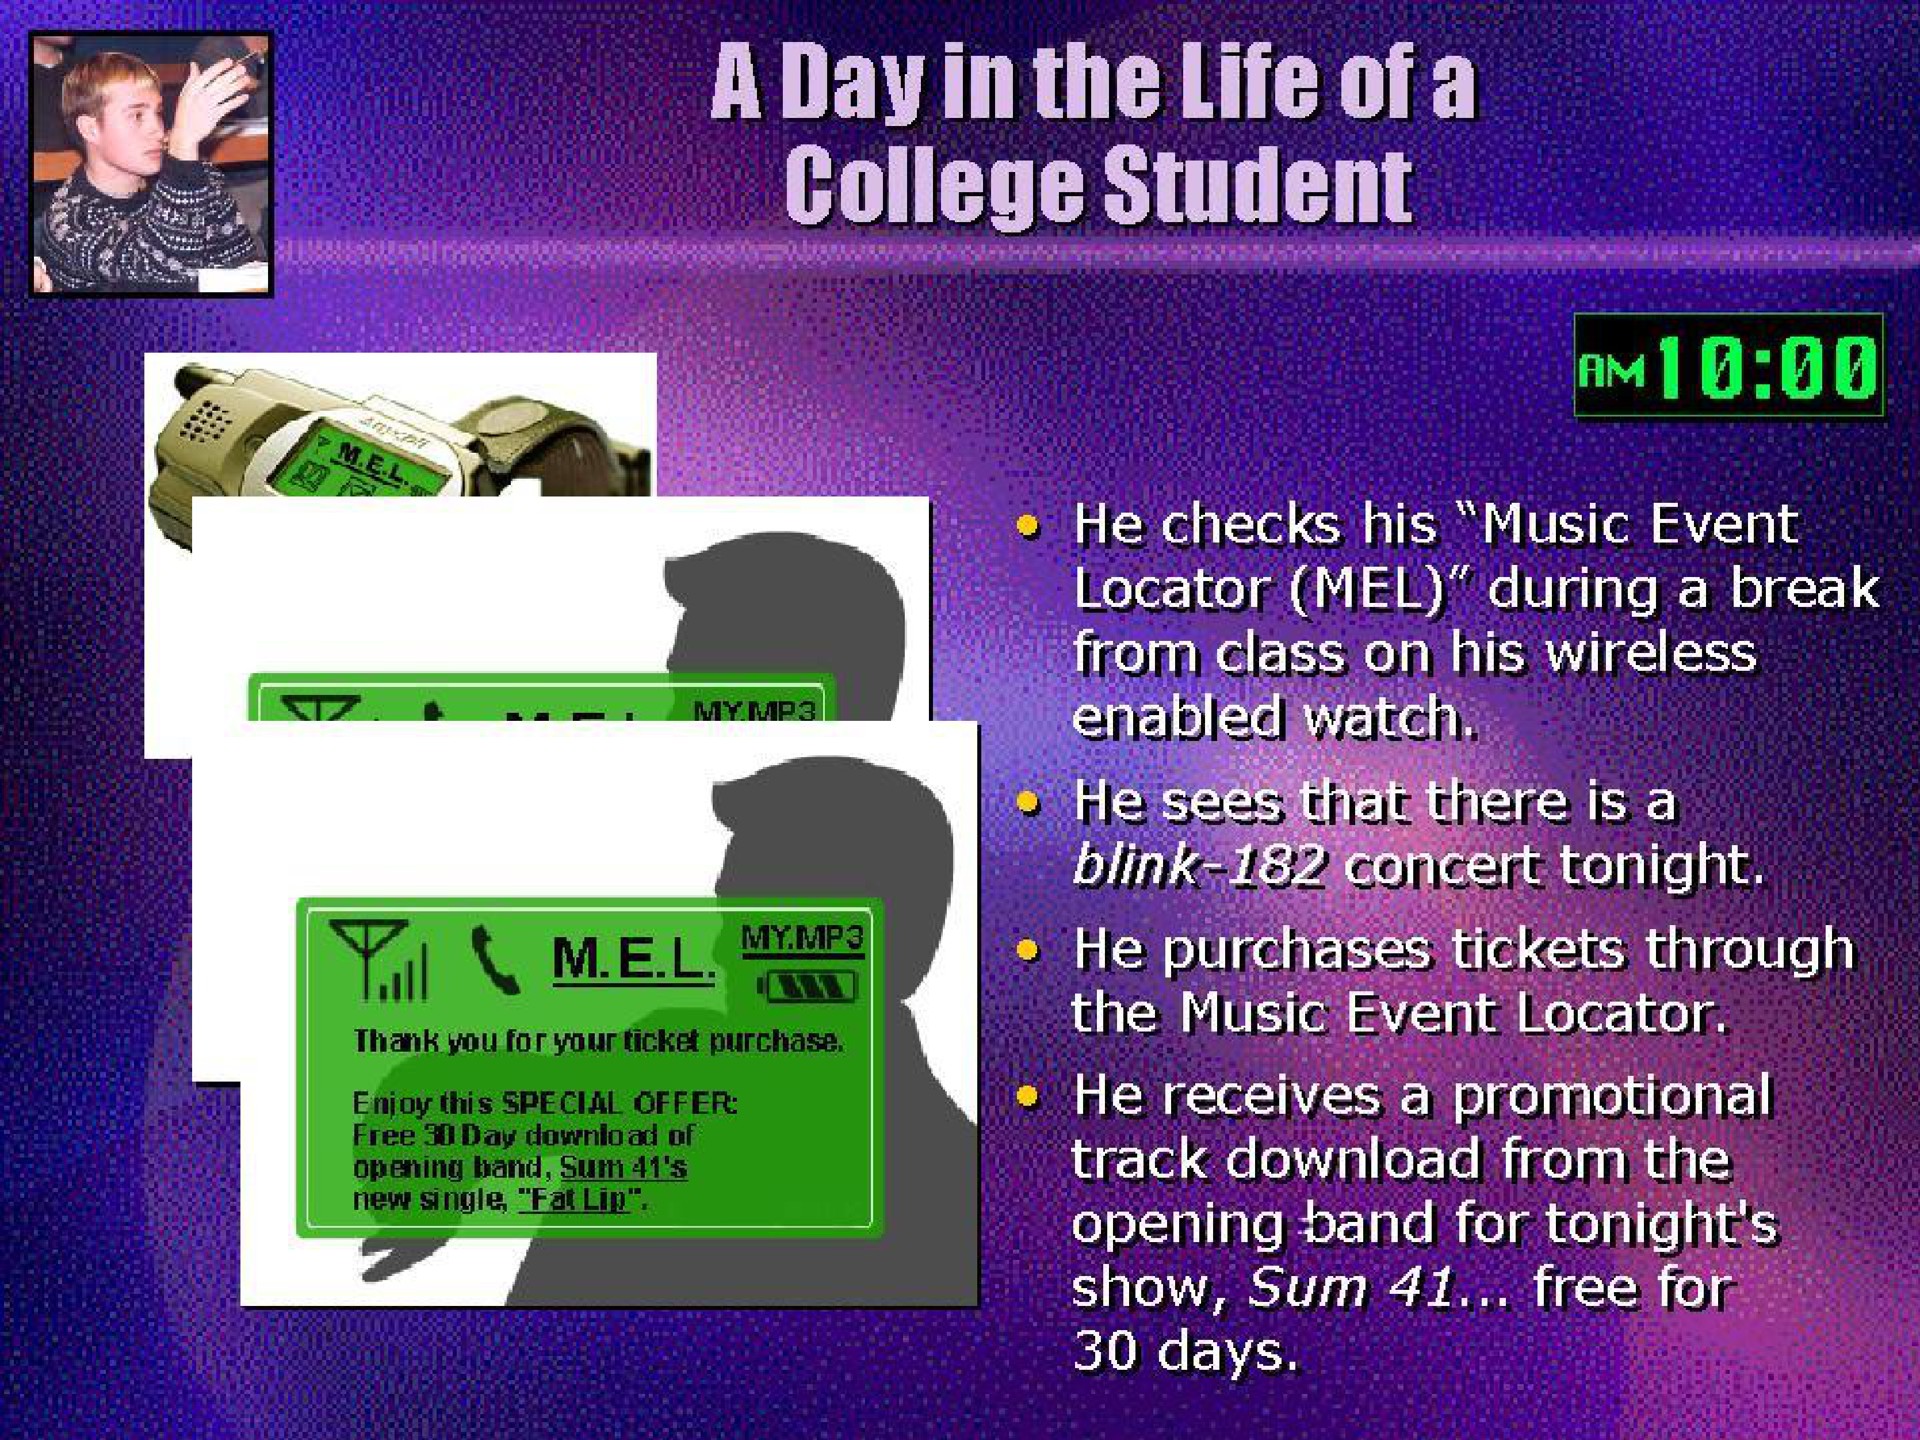 bet a college student locator mel during a break from class on his wireless enabled ess is a he tonight he tickets through the event locator he receives a promotional track from the opening for tonights show sum free for days | Universal Music Group